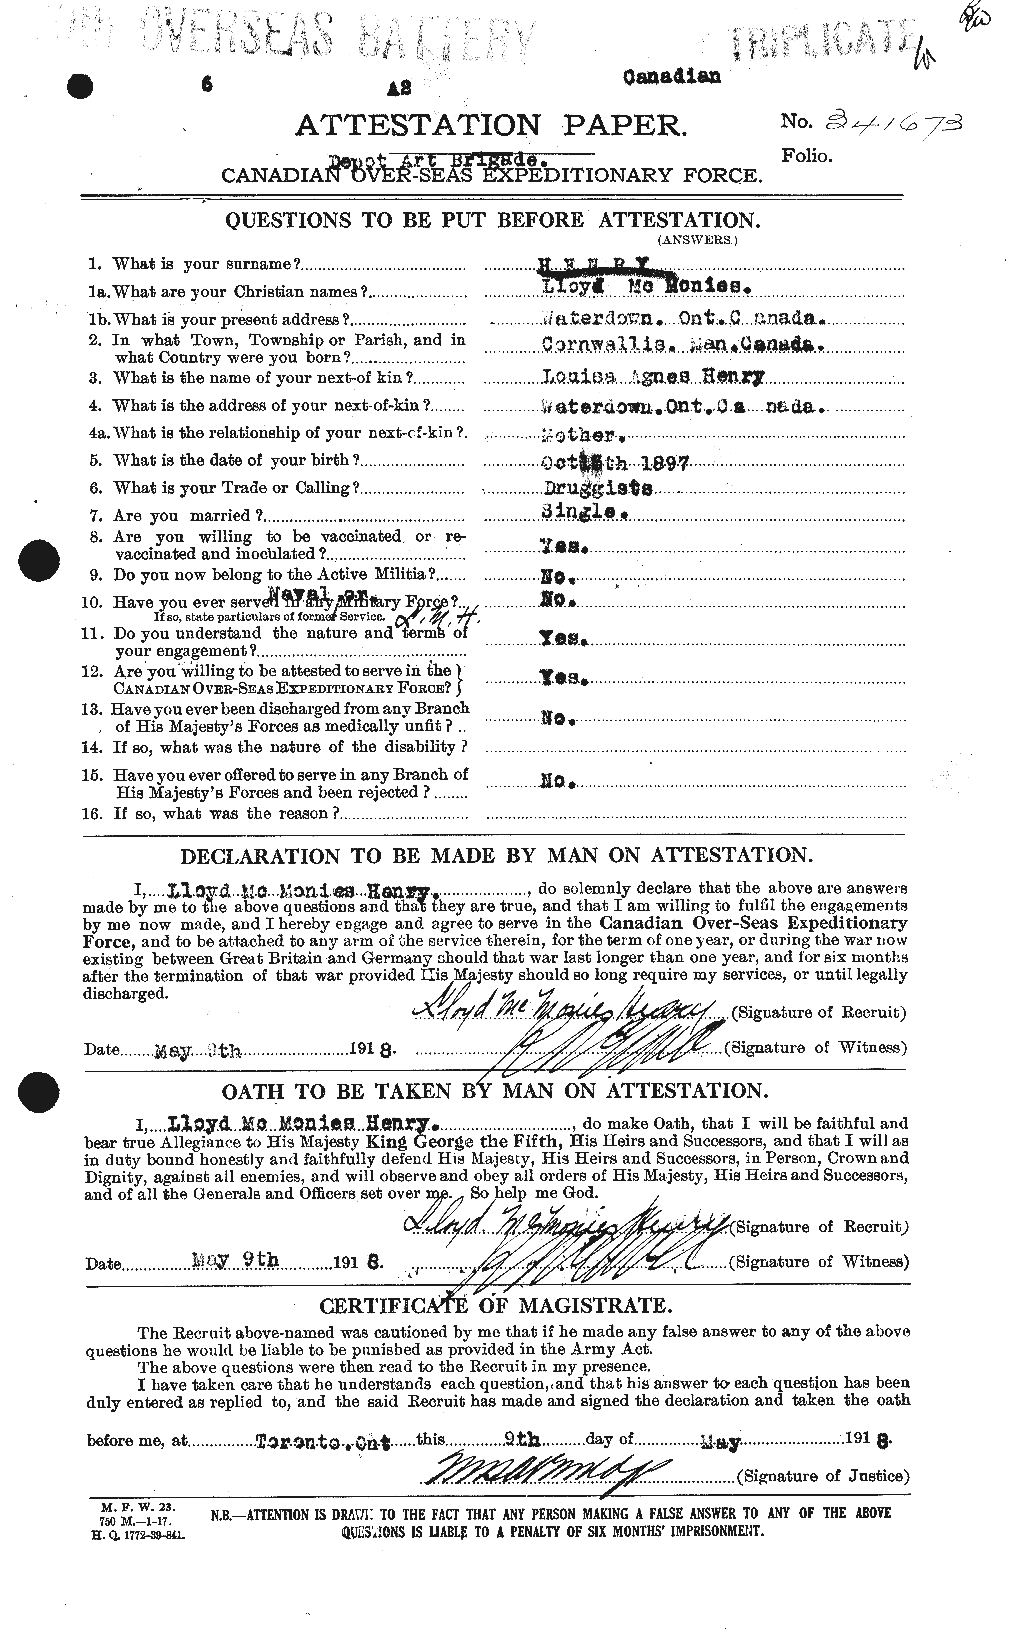 Personnel Records of the First World War - CEF 387657a